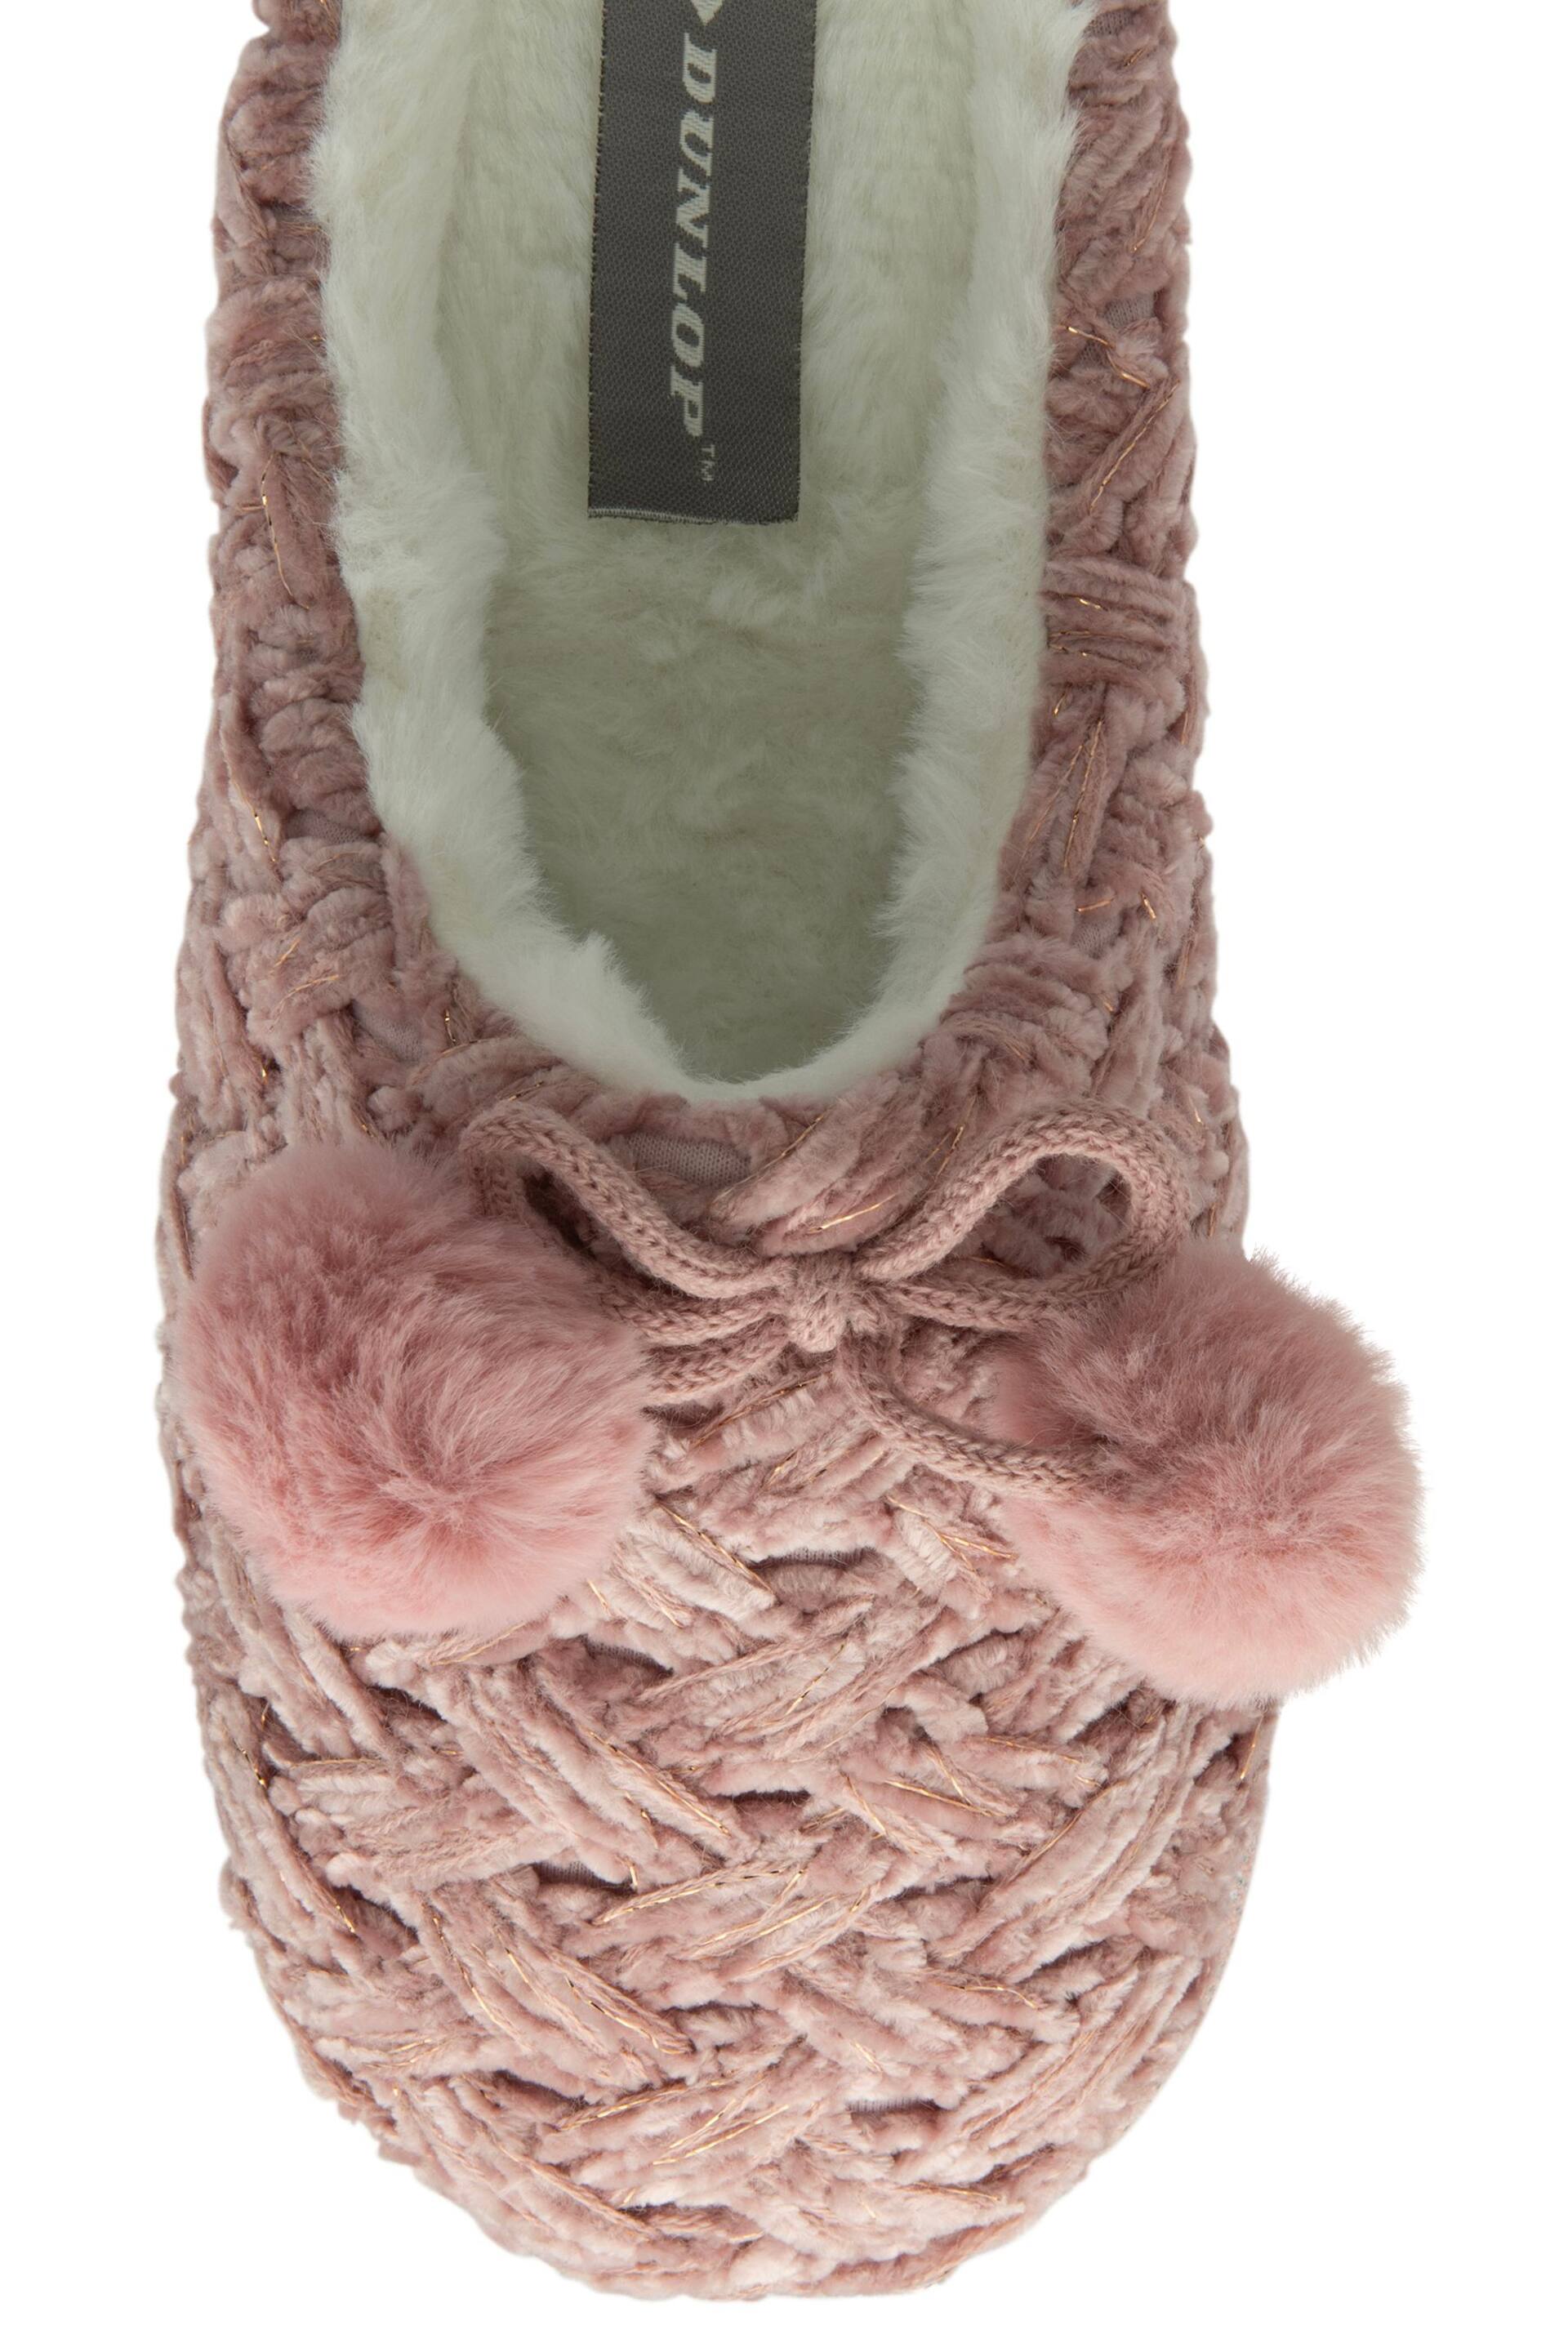 Dunlop Light Pink Ladies Knitted Closed Toe Mule Slippers - Image 4 of 4